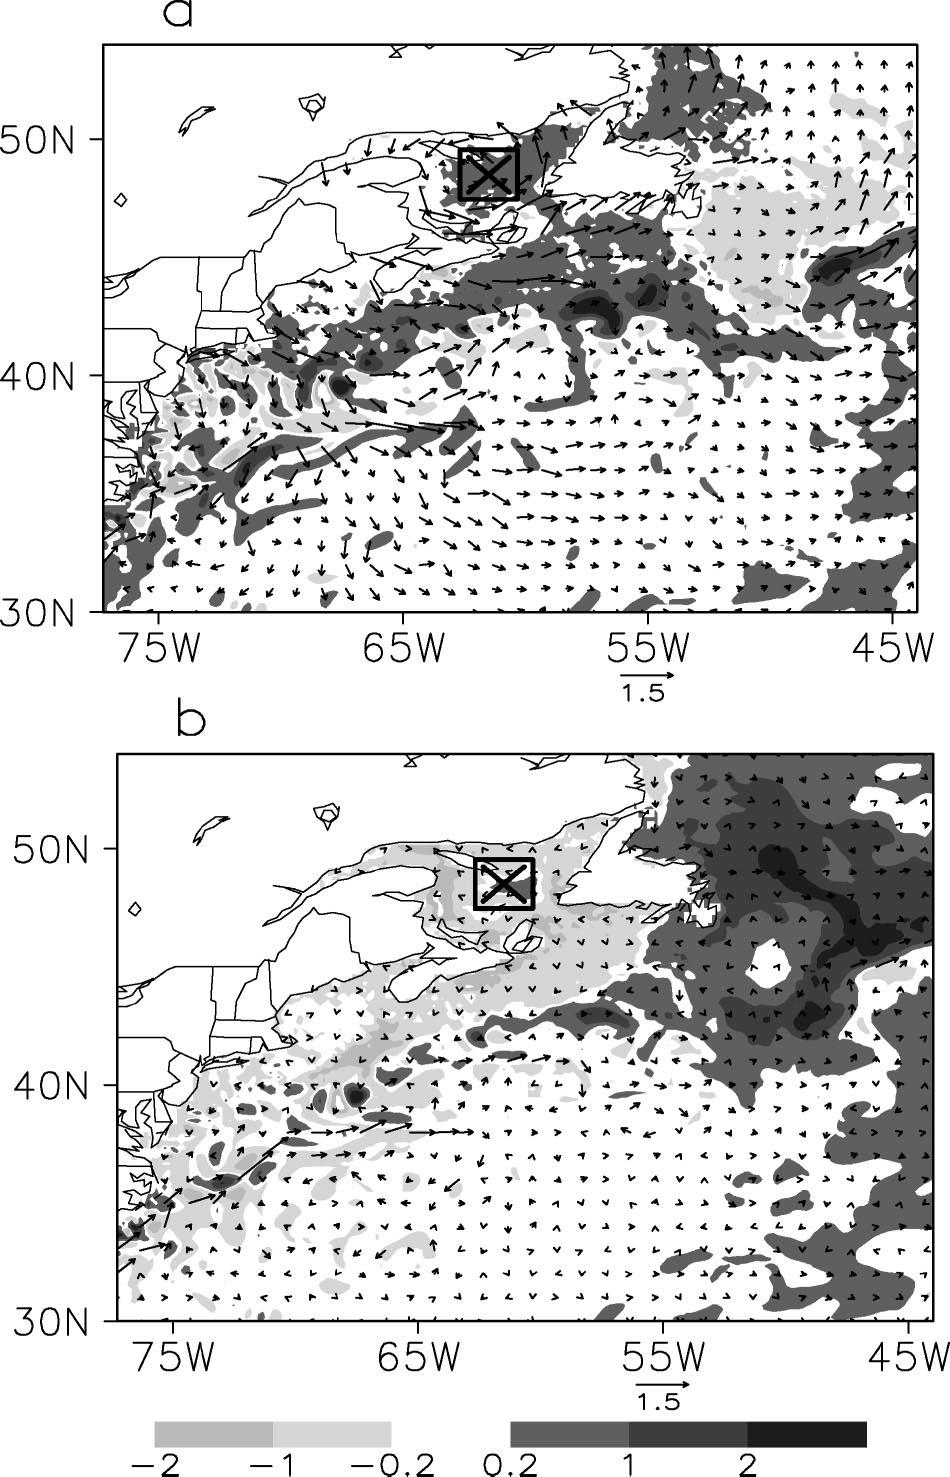 2448 MONTHLY WEATHER REVIEW VOLUME 132 FIG. 19. SST differences between the 48-h simulation minus initial state, using partially coupled models: (a) BOMB-no-heat and (b) BOMB-no-wind.